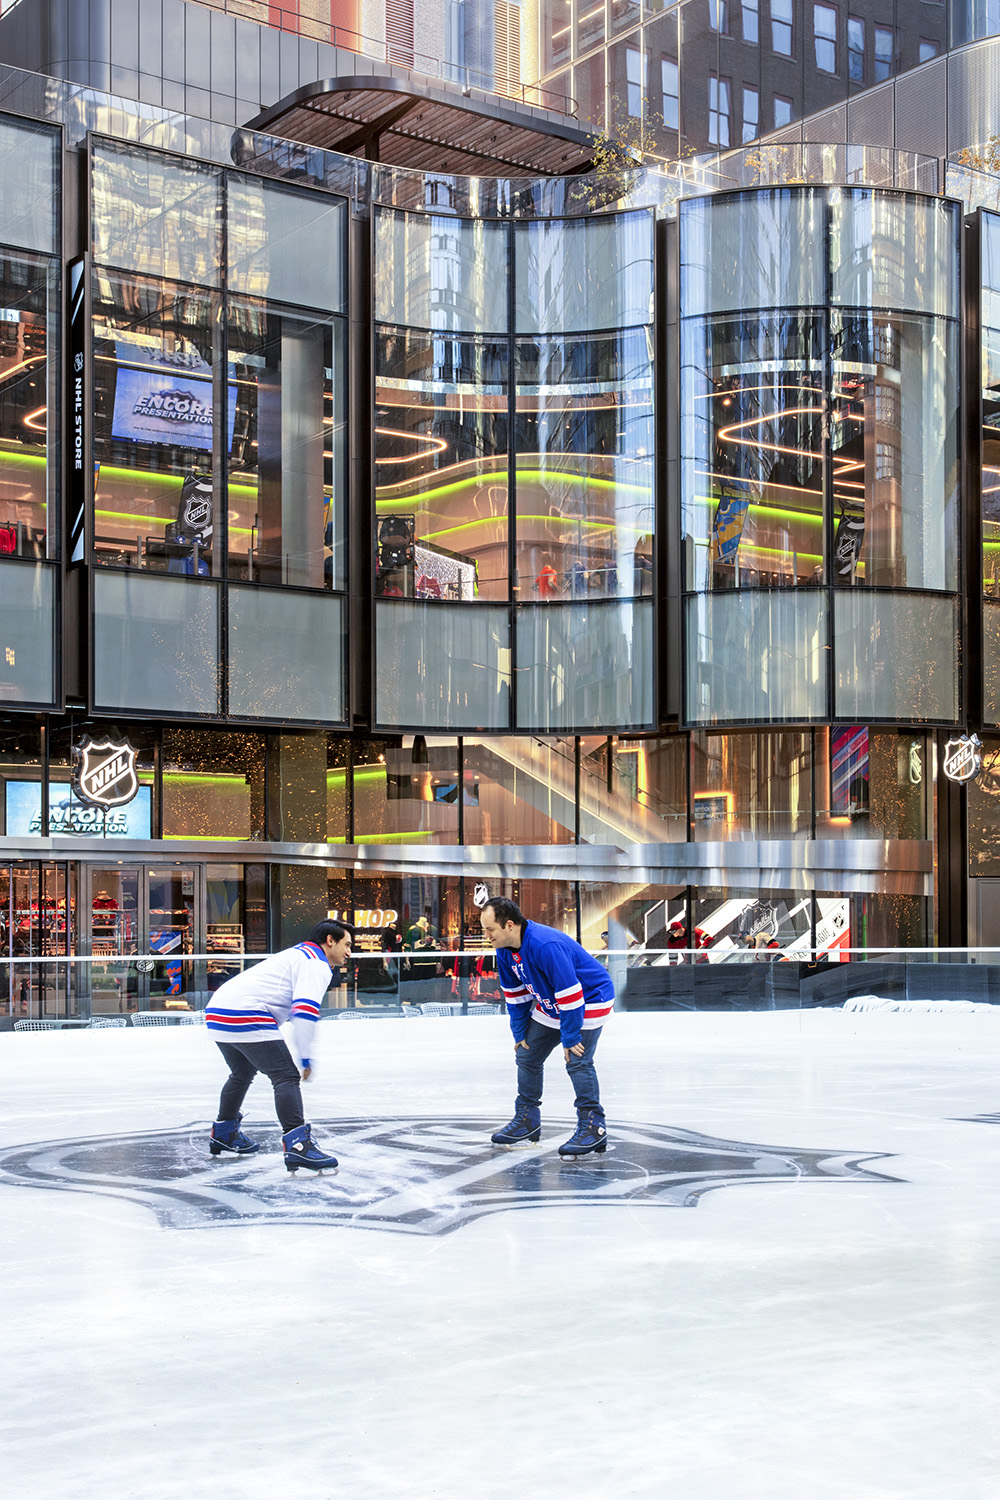 News: NHL Shop Featured in Retail TouchPoints : TPG Architecture